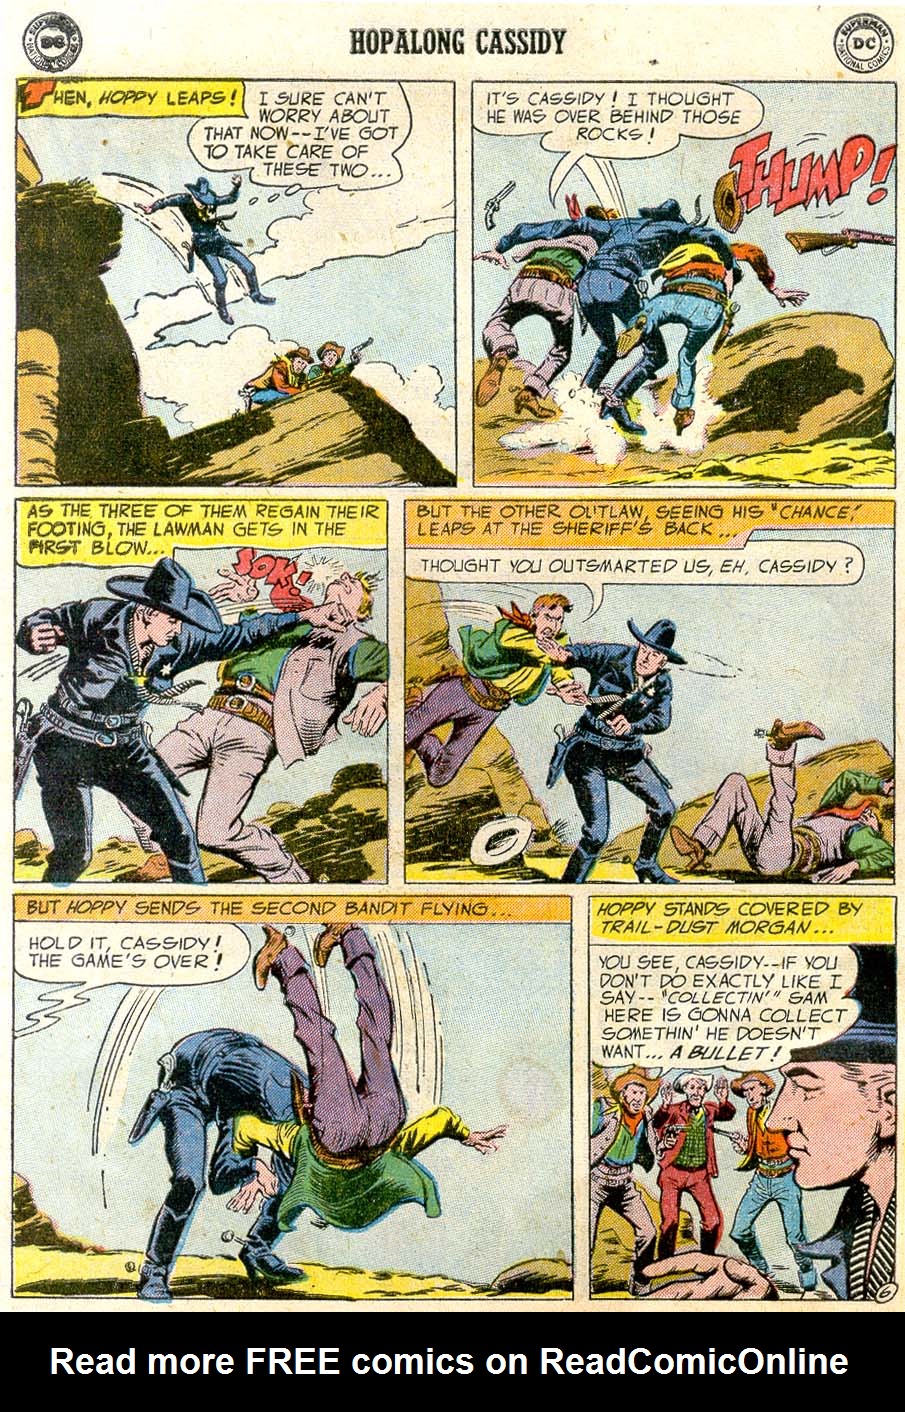 Read online Hopalong Cassidy comic -  Issue #99 - 8